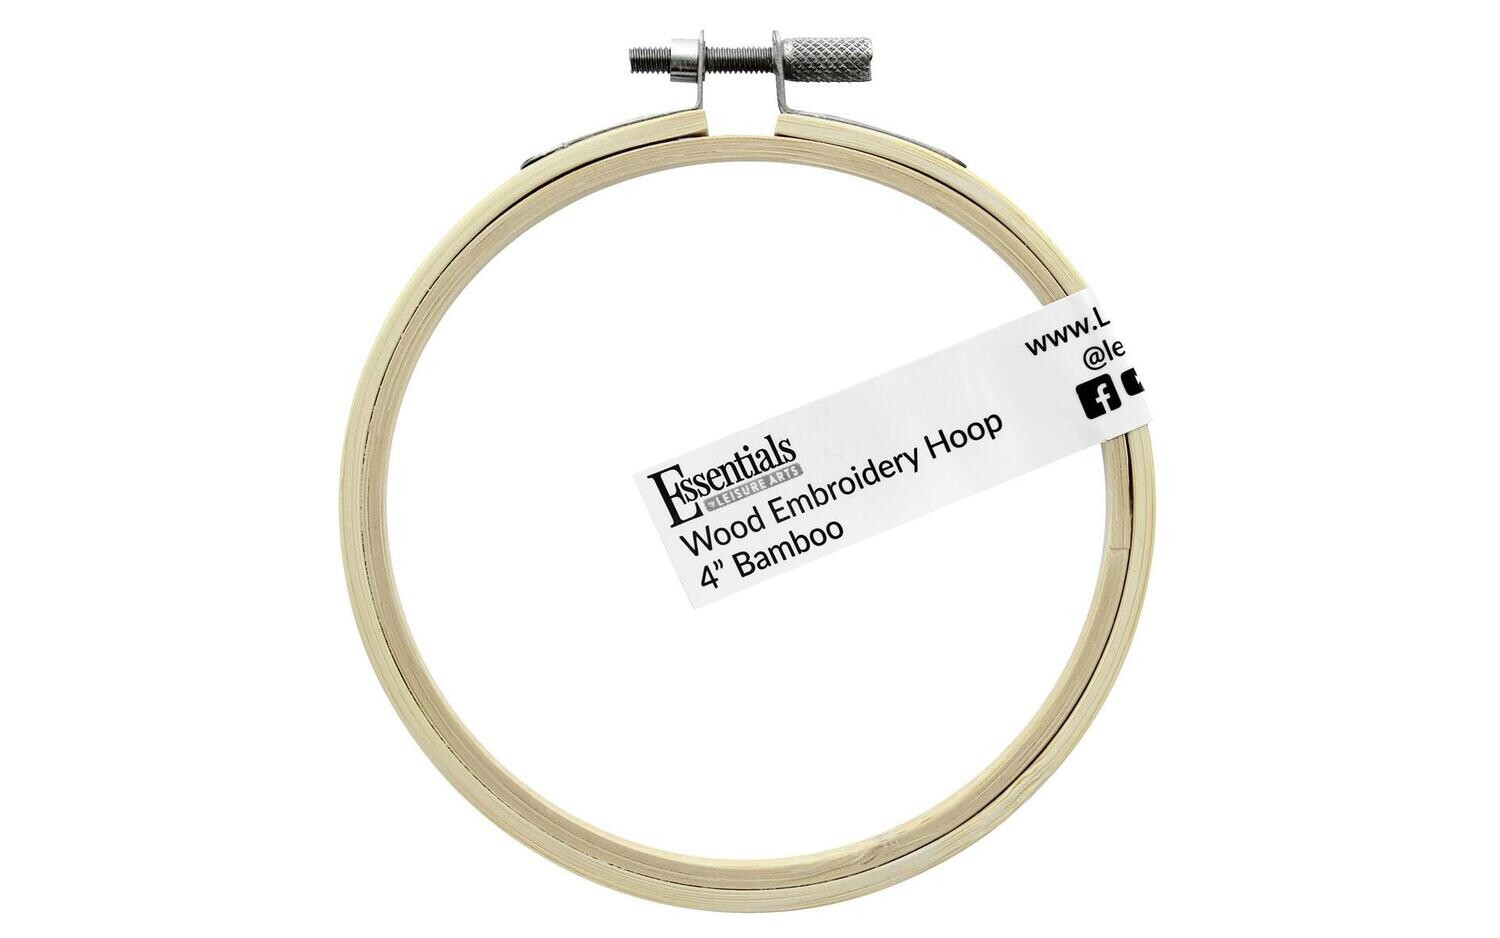 Leisure Arts Essentials Bamboo Embroidery Hoops